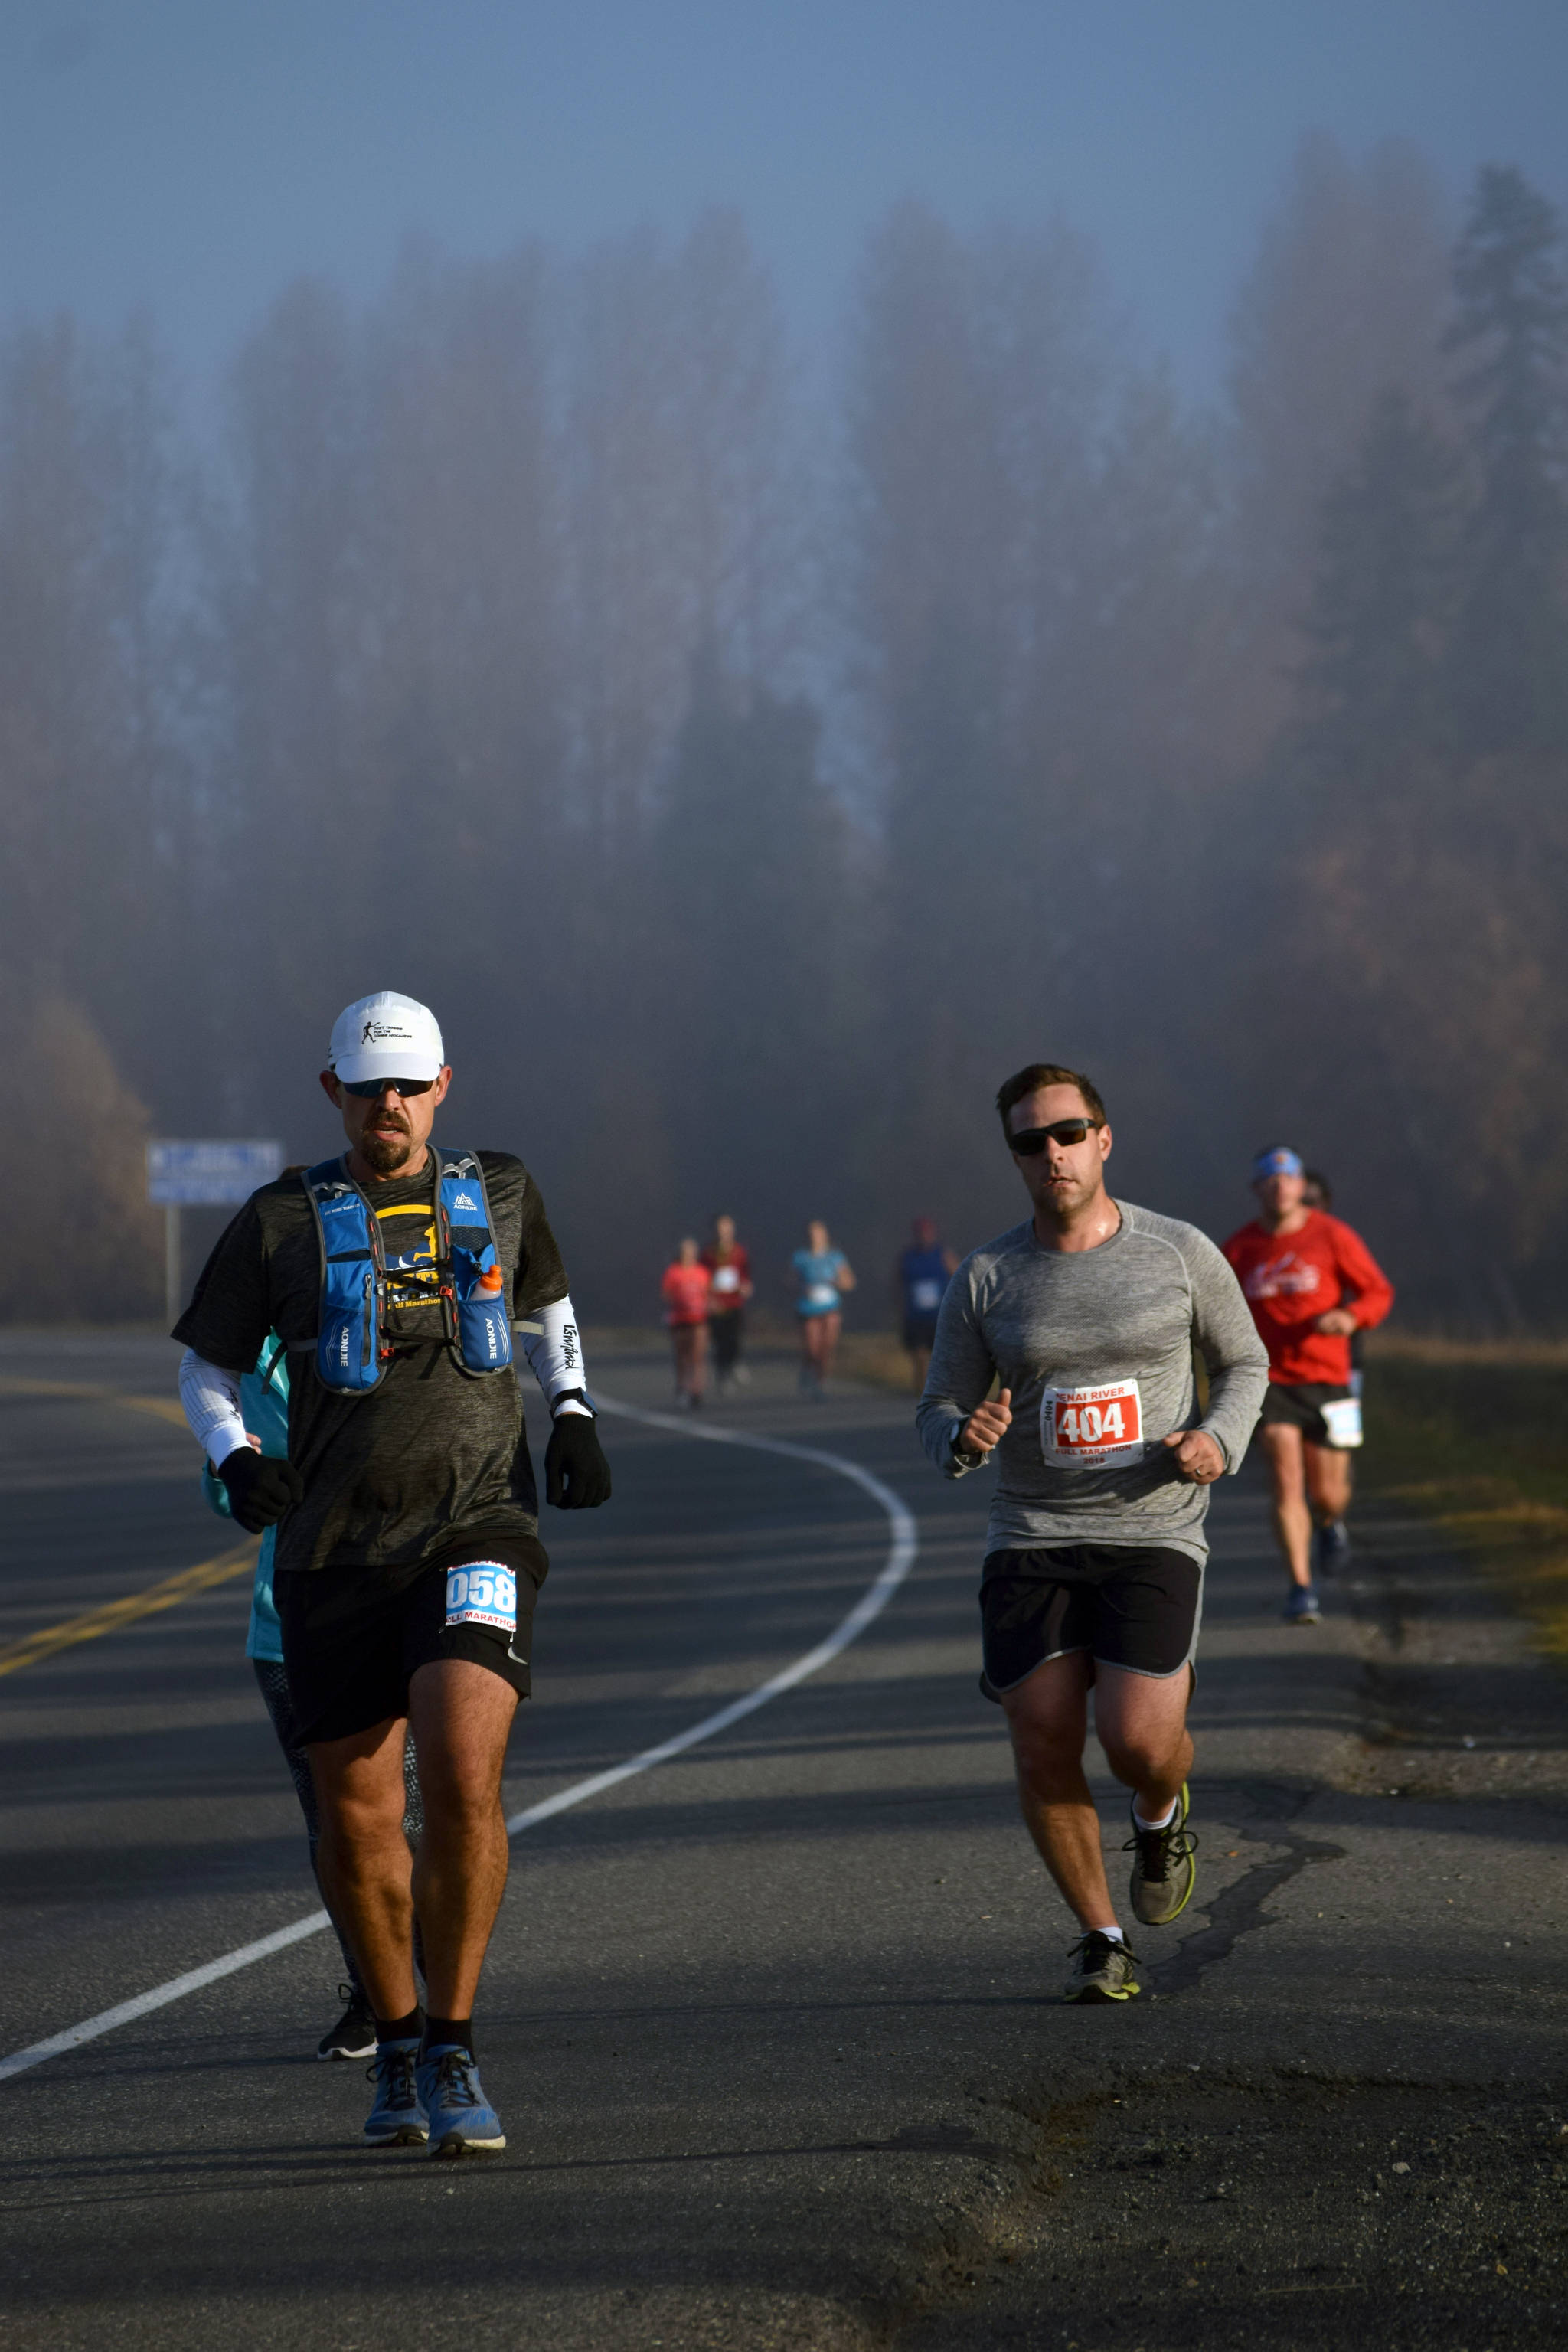 Michael Eriks of Carterville, Illinois, leads a pack of Kenai River Marathon racers through the early morning fog on Sunday, Sept. 30, 2018, on Bridge Access Road. (Photo by Jeff Helminiak/Peninsula Clarion)